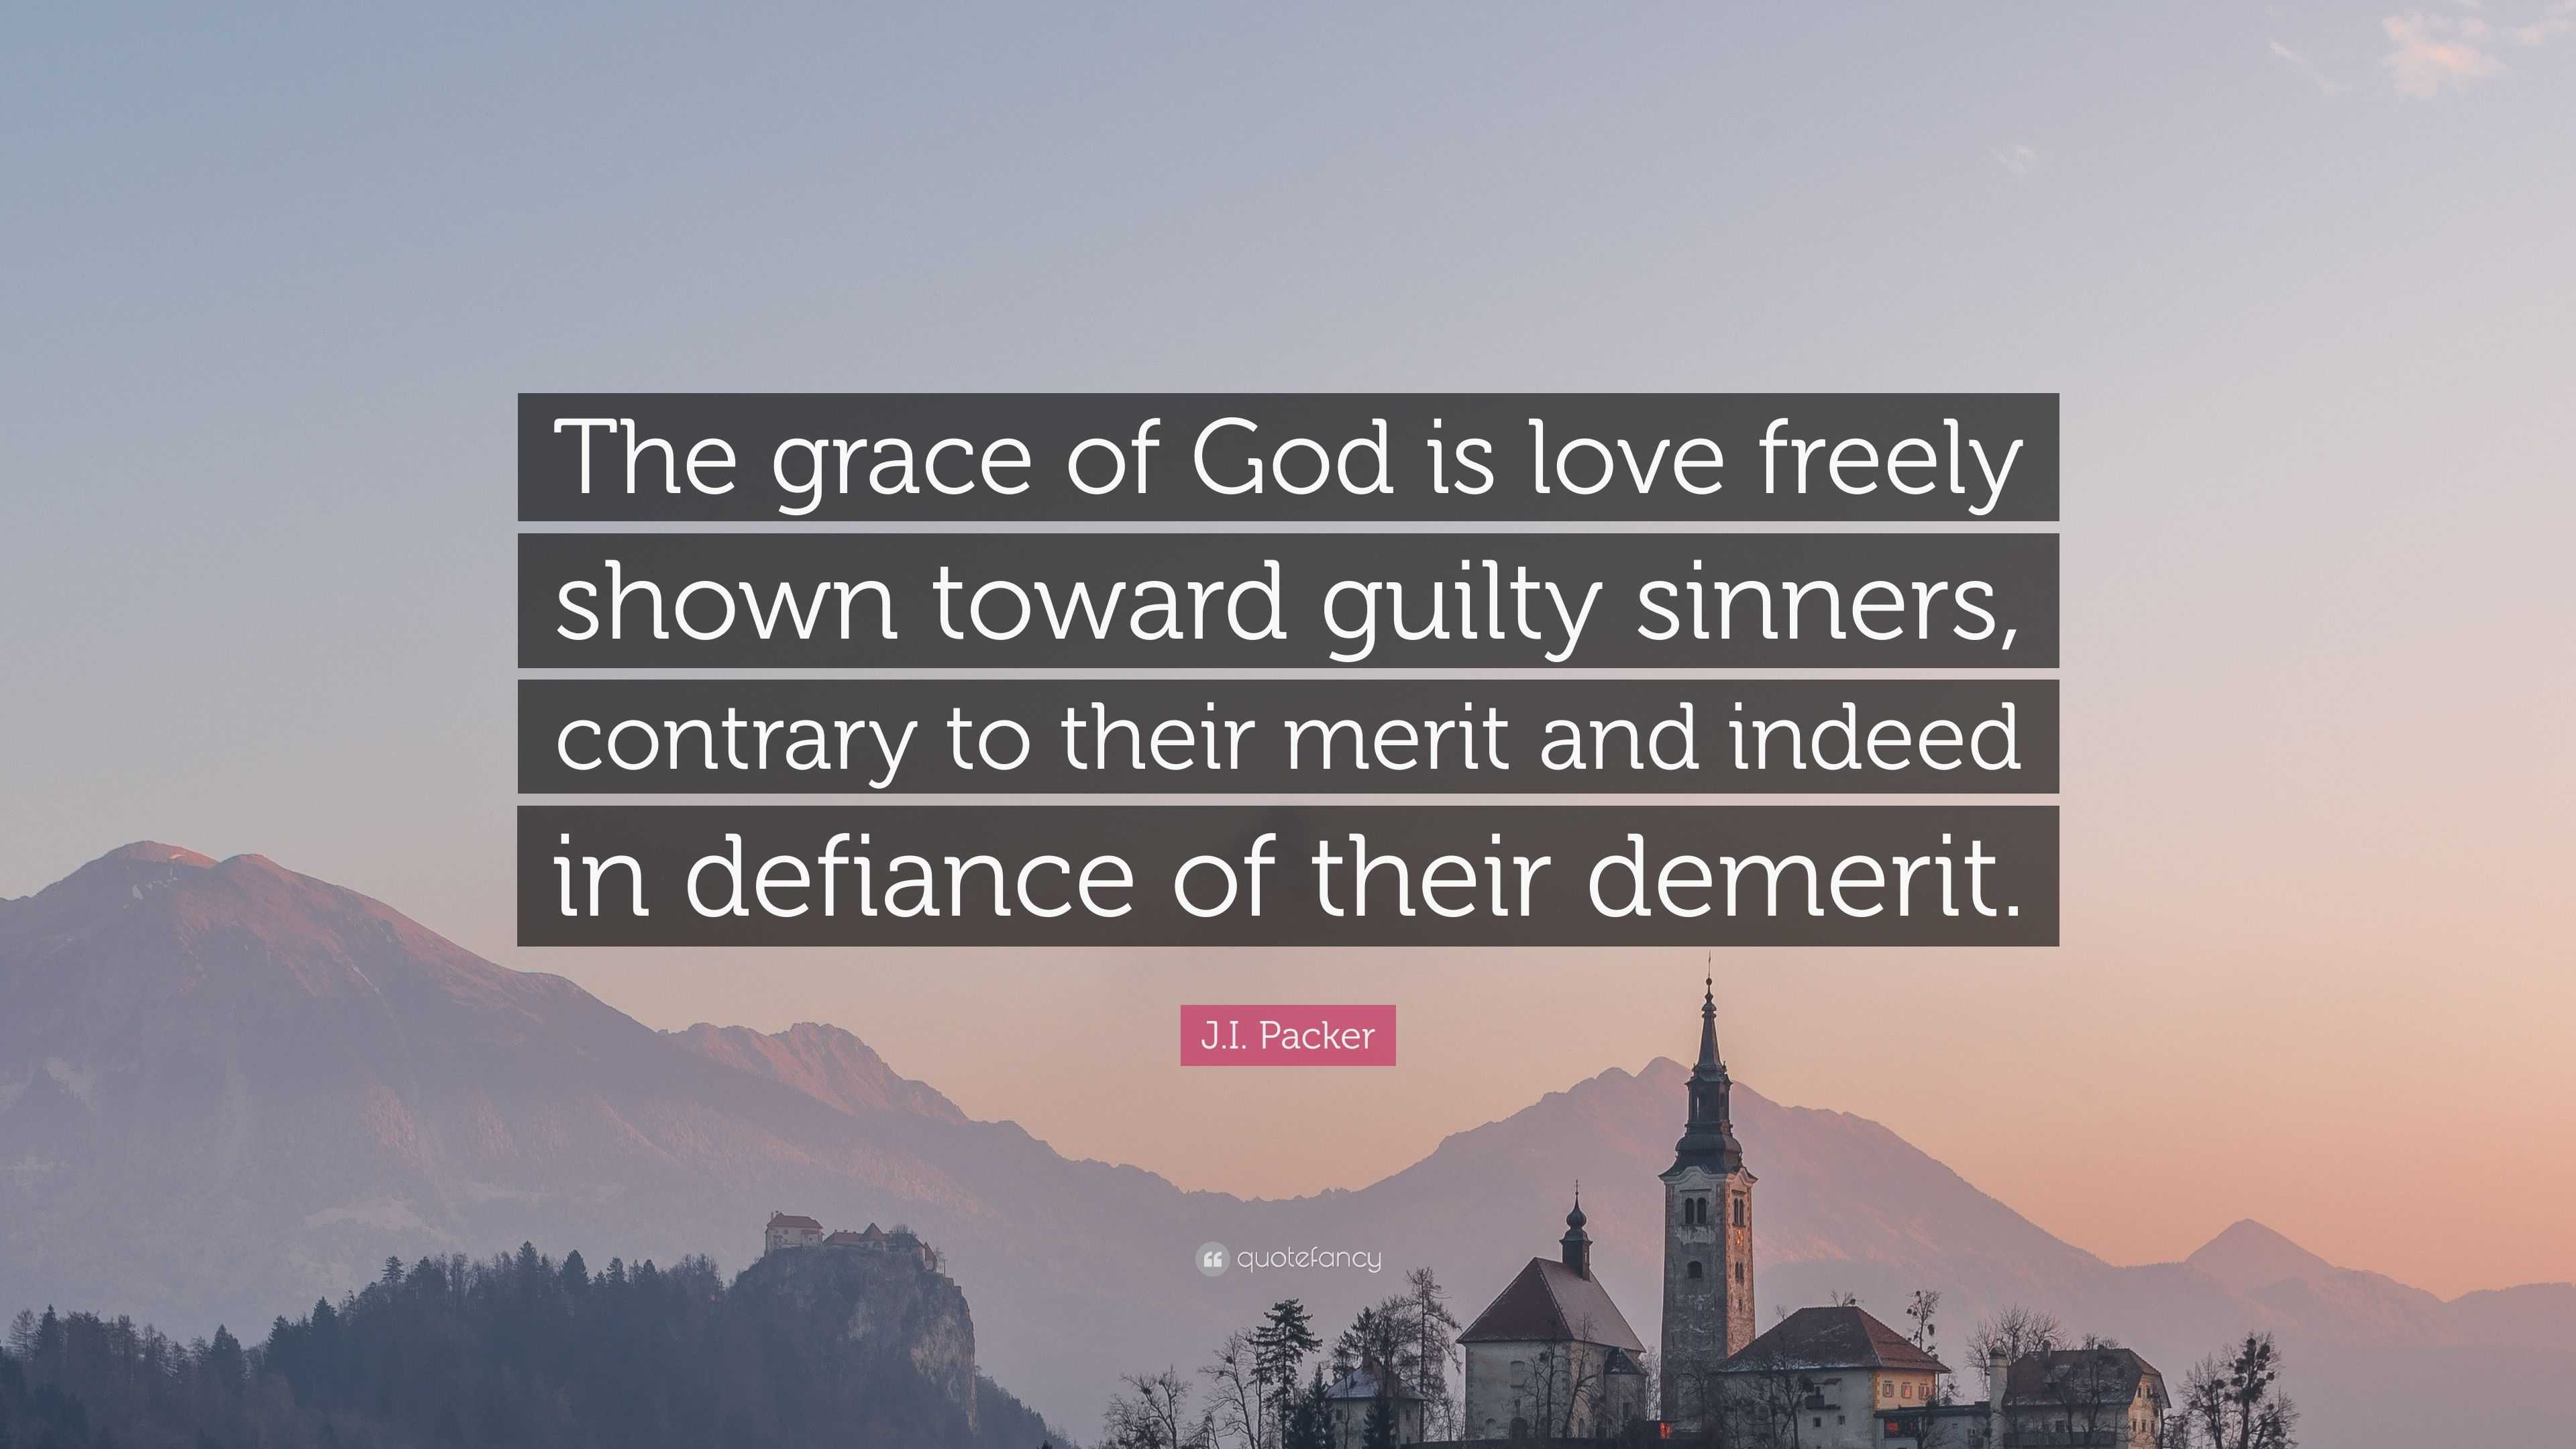 J I Packer Quote “The grace of God is love freely shown toward guilty sinners